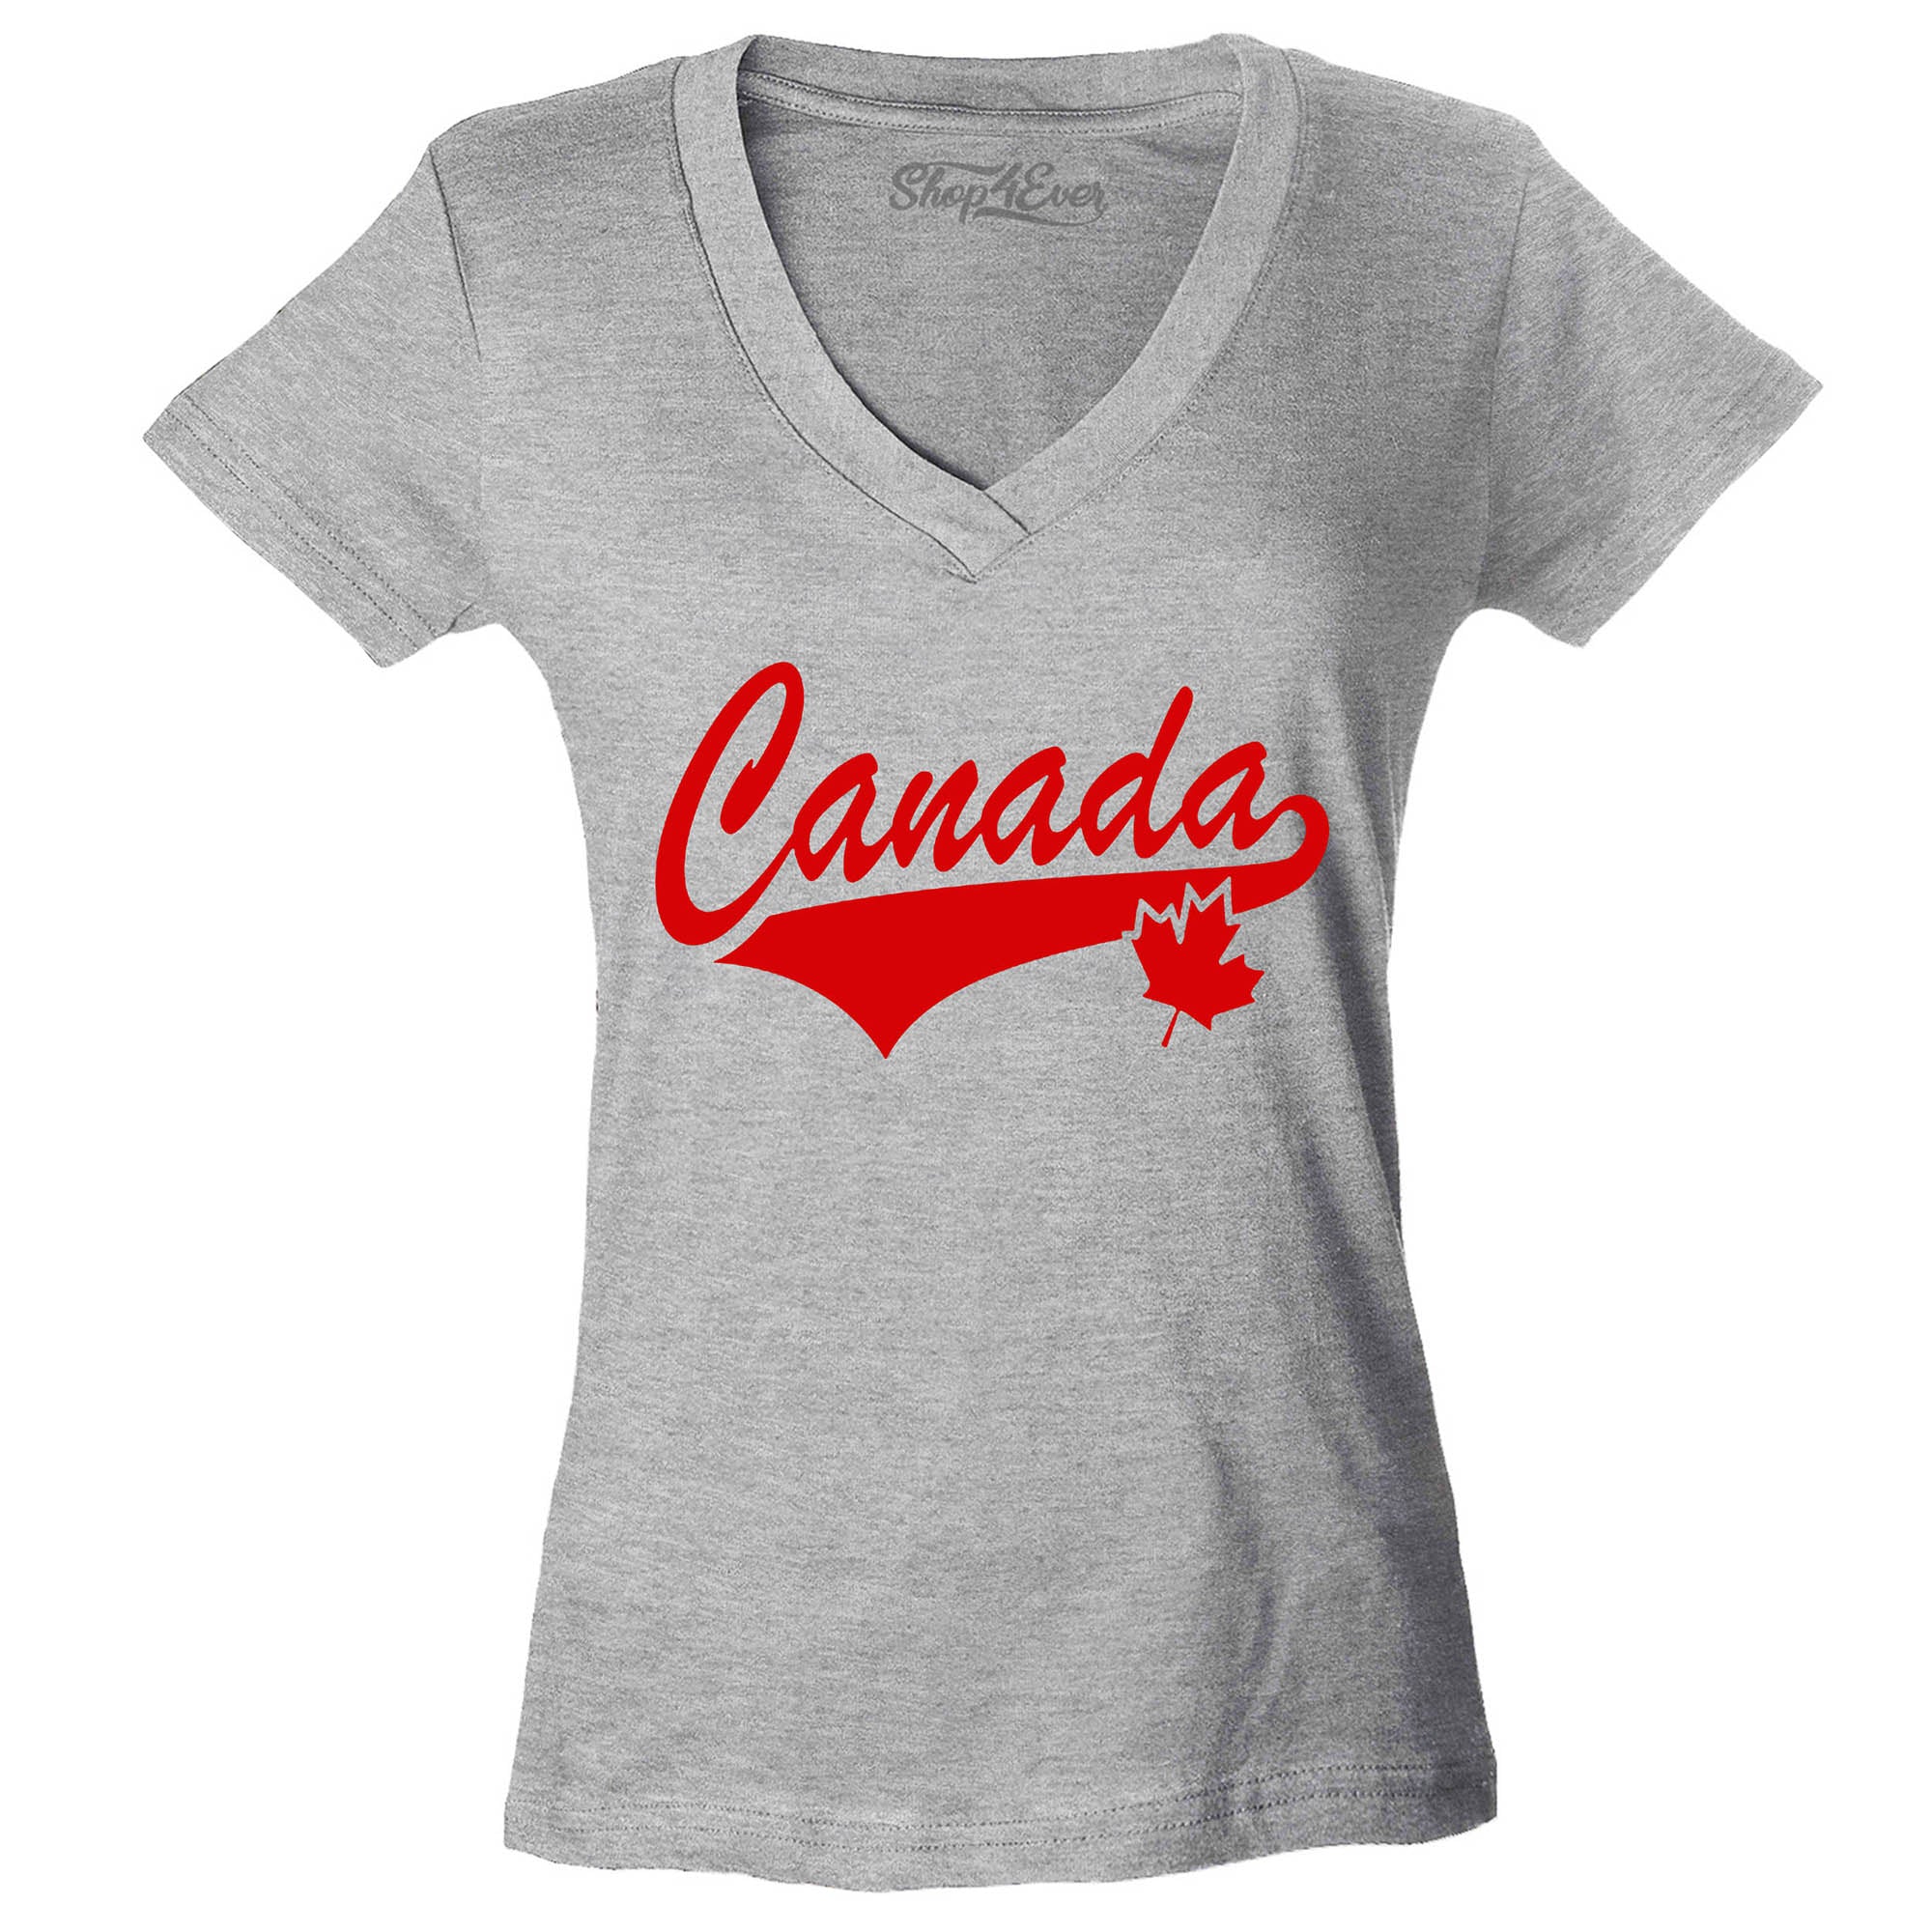 Canada Red Women's V-Neck T-Shirt Slim FIT